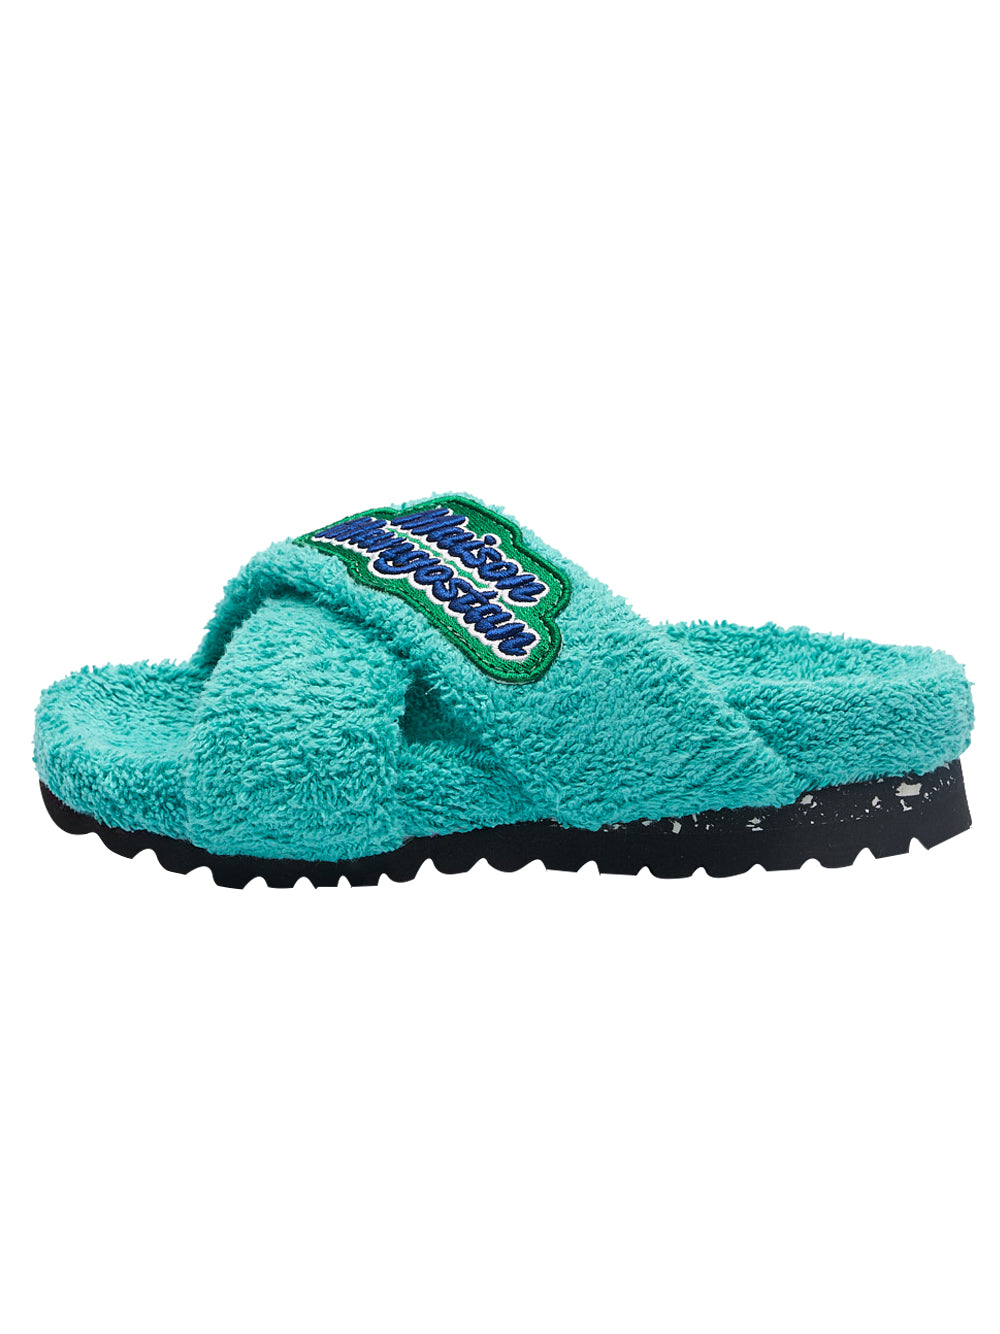 Lime Turquoise Sandals